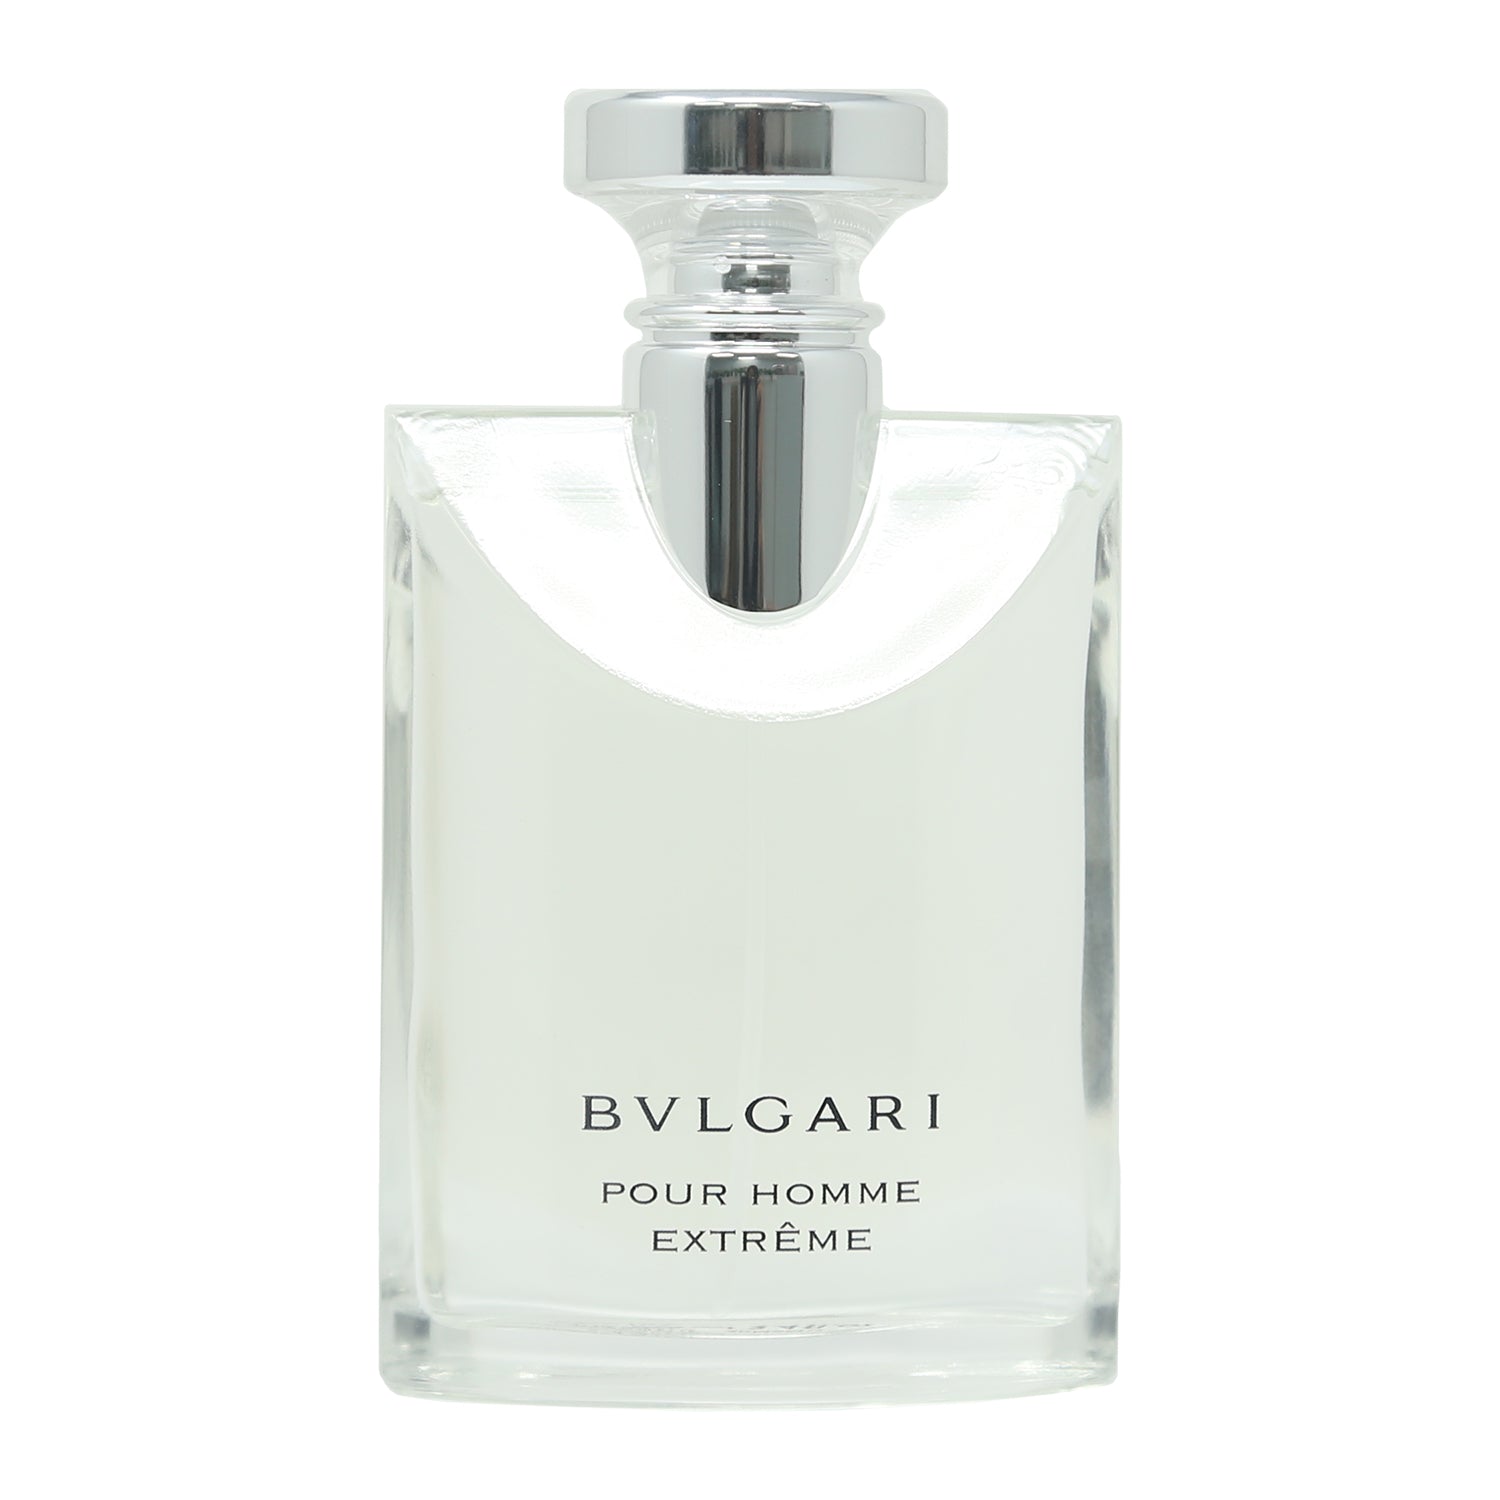 Pour Homme Extreme by Bvlgari Fragrance Samples, DecantX